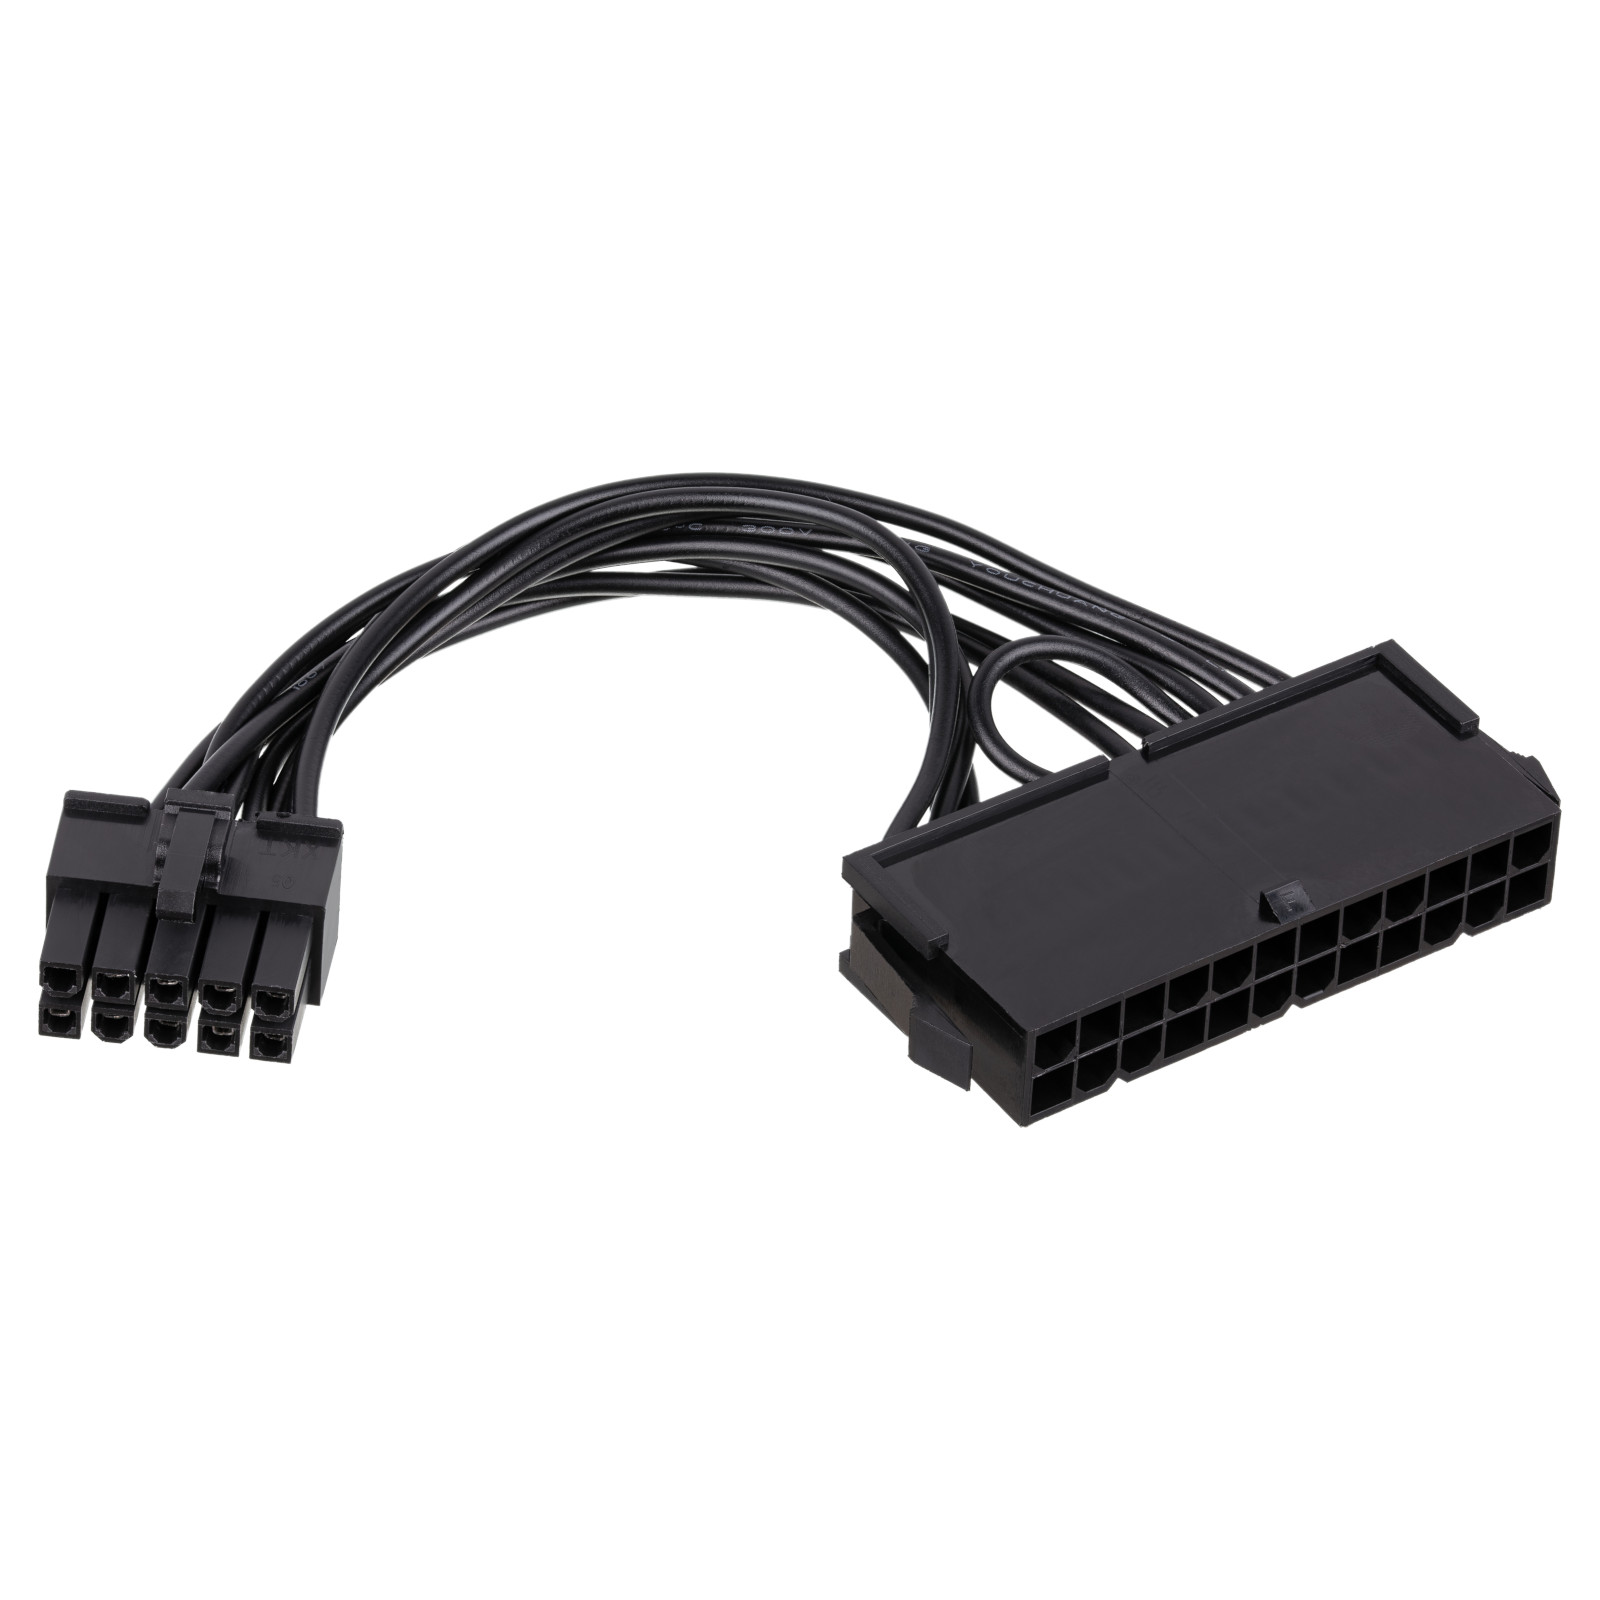 Main image Adapter with cable AK-CA-76 P1 24 pin (m) / 10 pin (f) 10cm